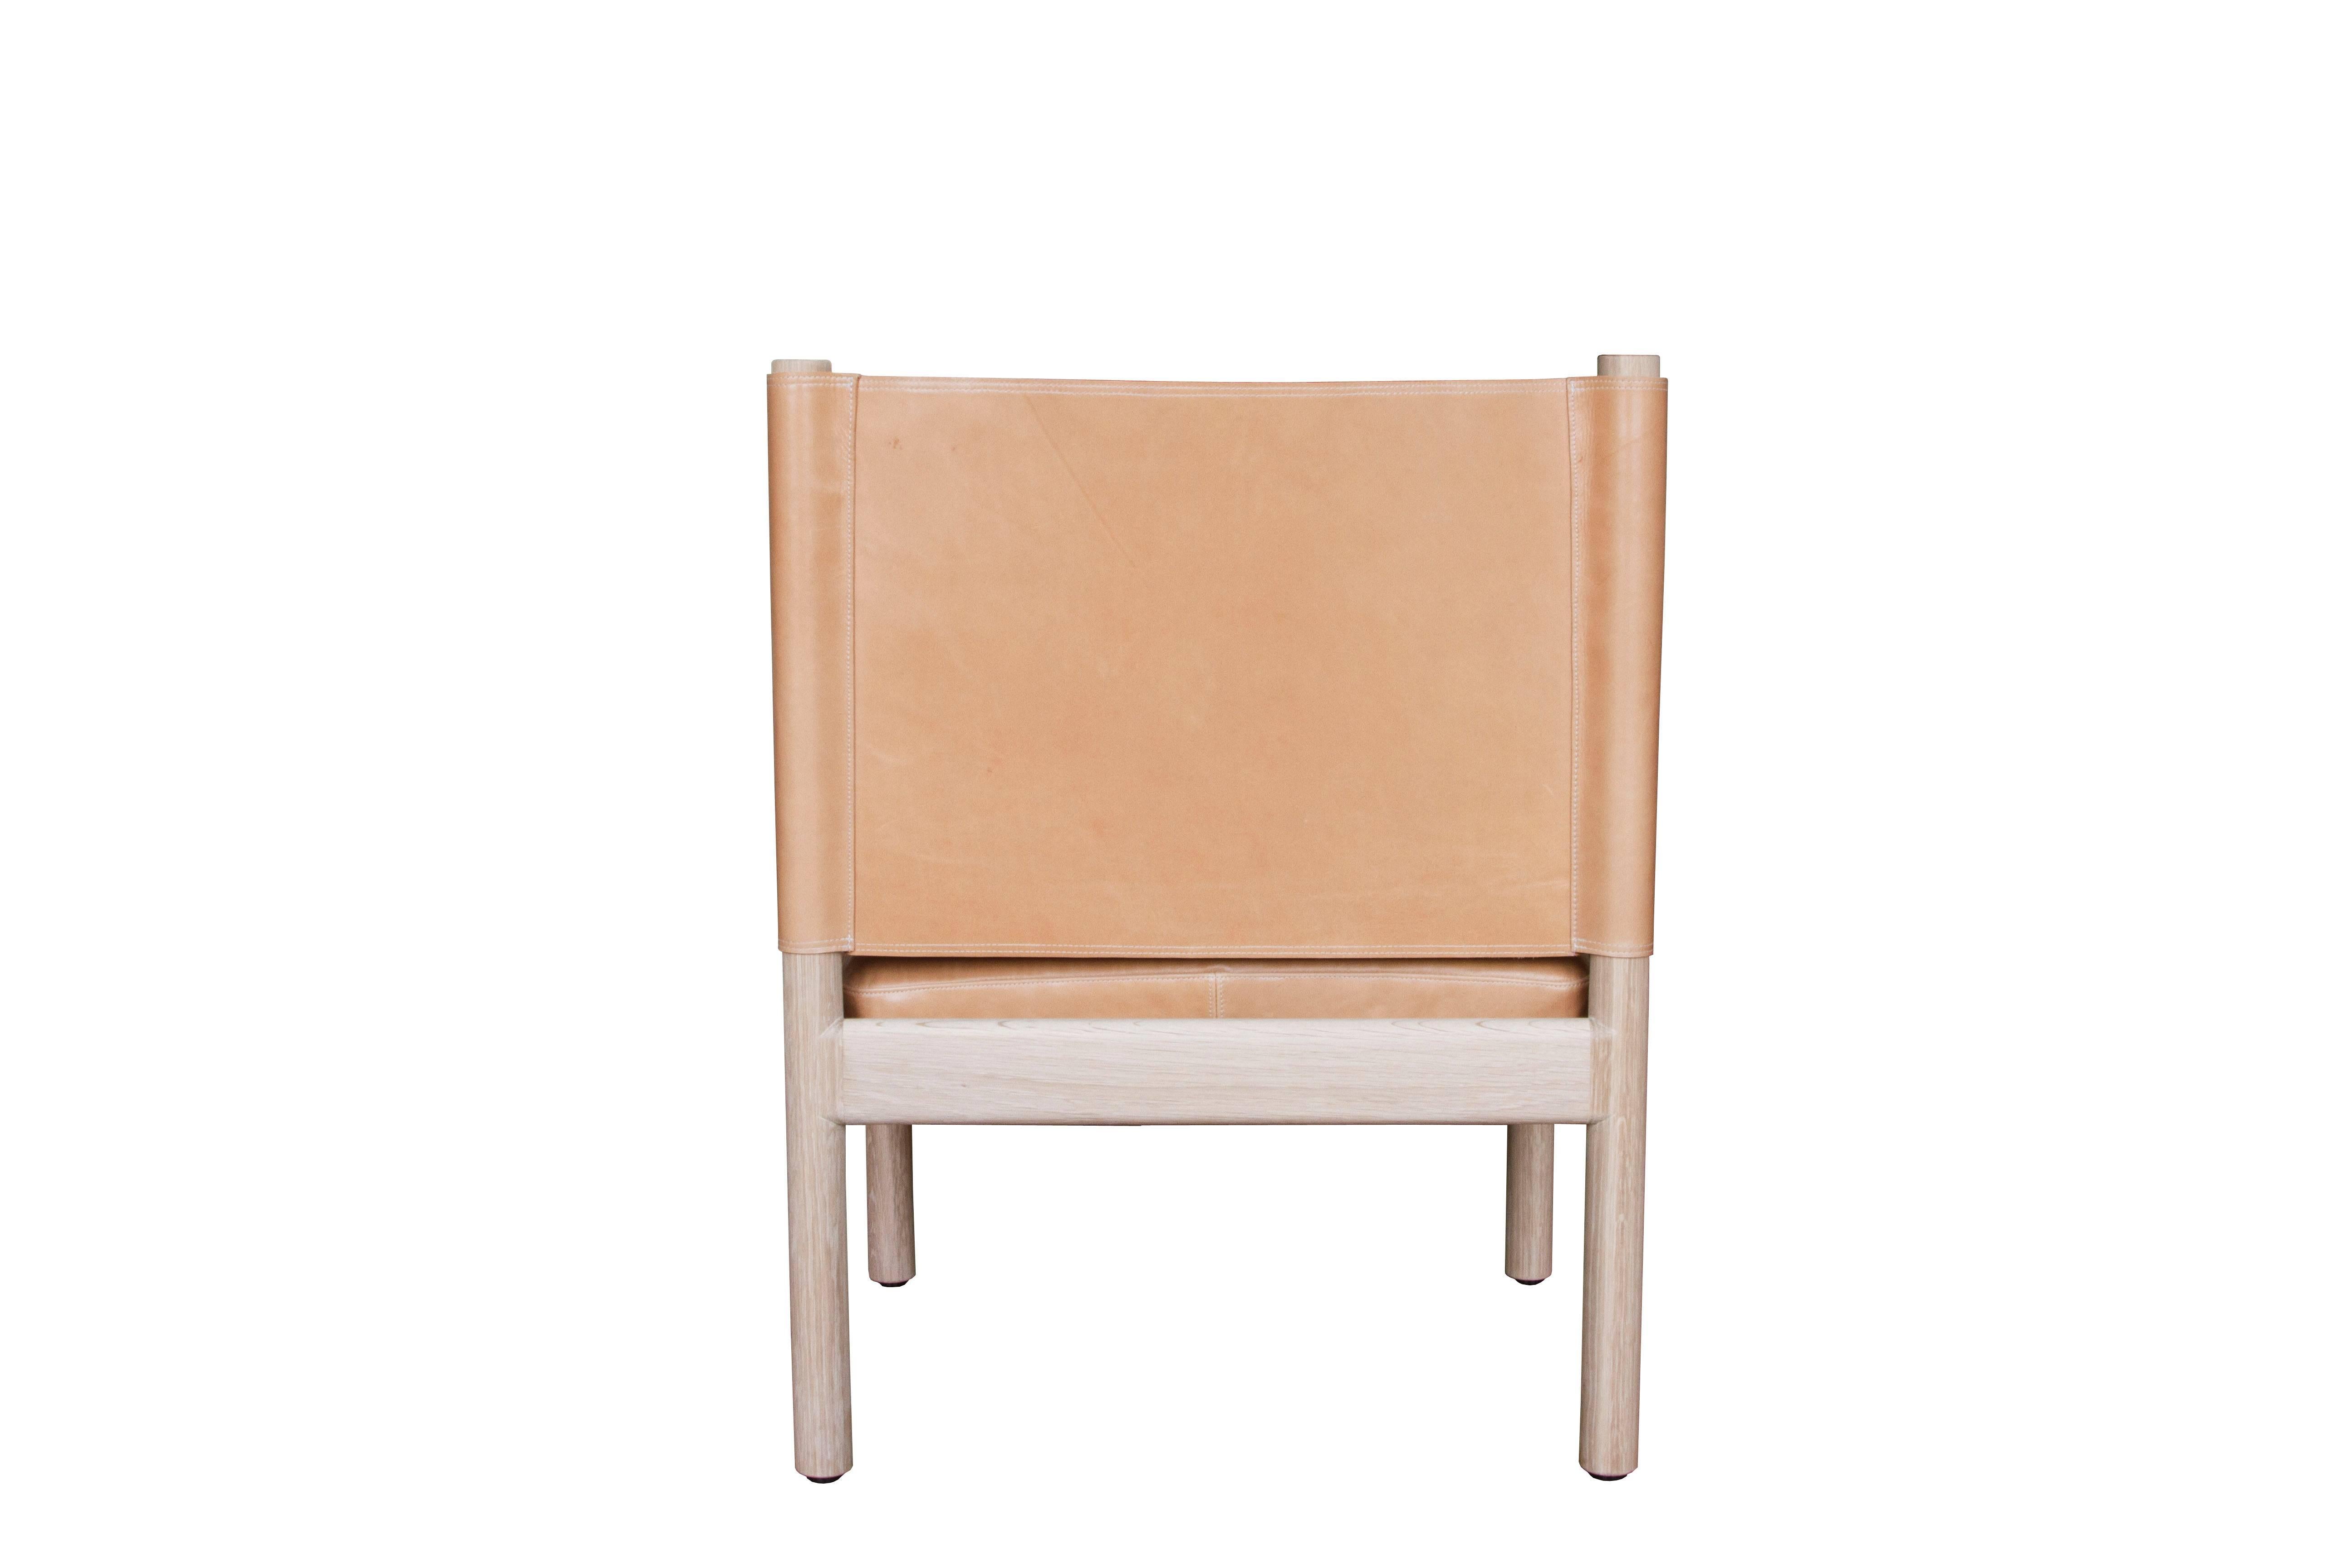 Modern Reed Lounge Chair in Oak and Leather - handcrafted by Richard Wrightman Design